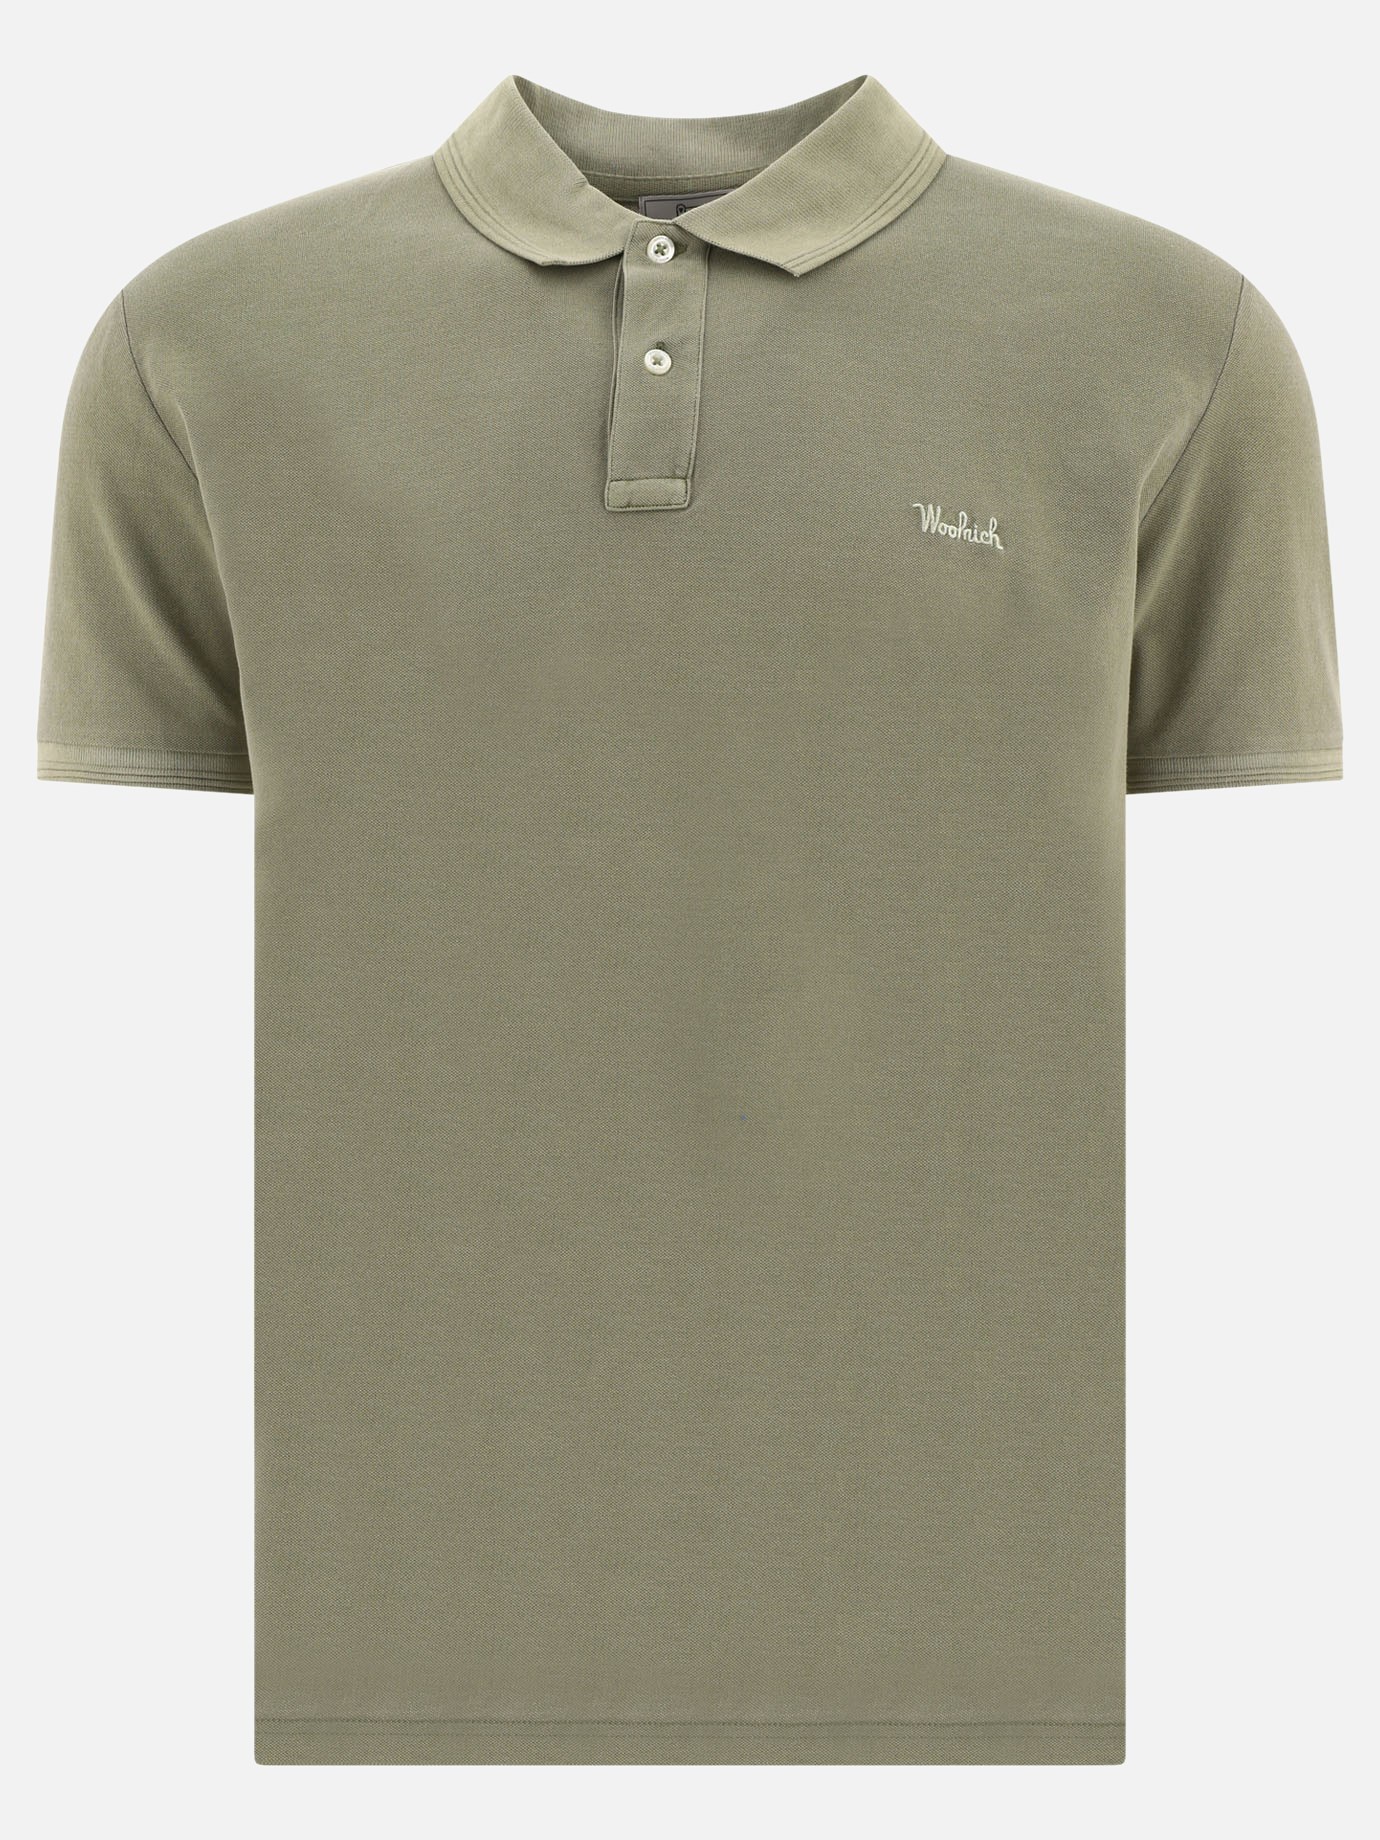 Mens Shirts Woolrich Shirts Woolrich Army Green Cotton Shirt in Grey for Men 